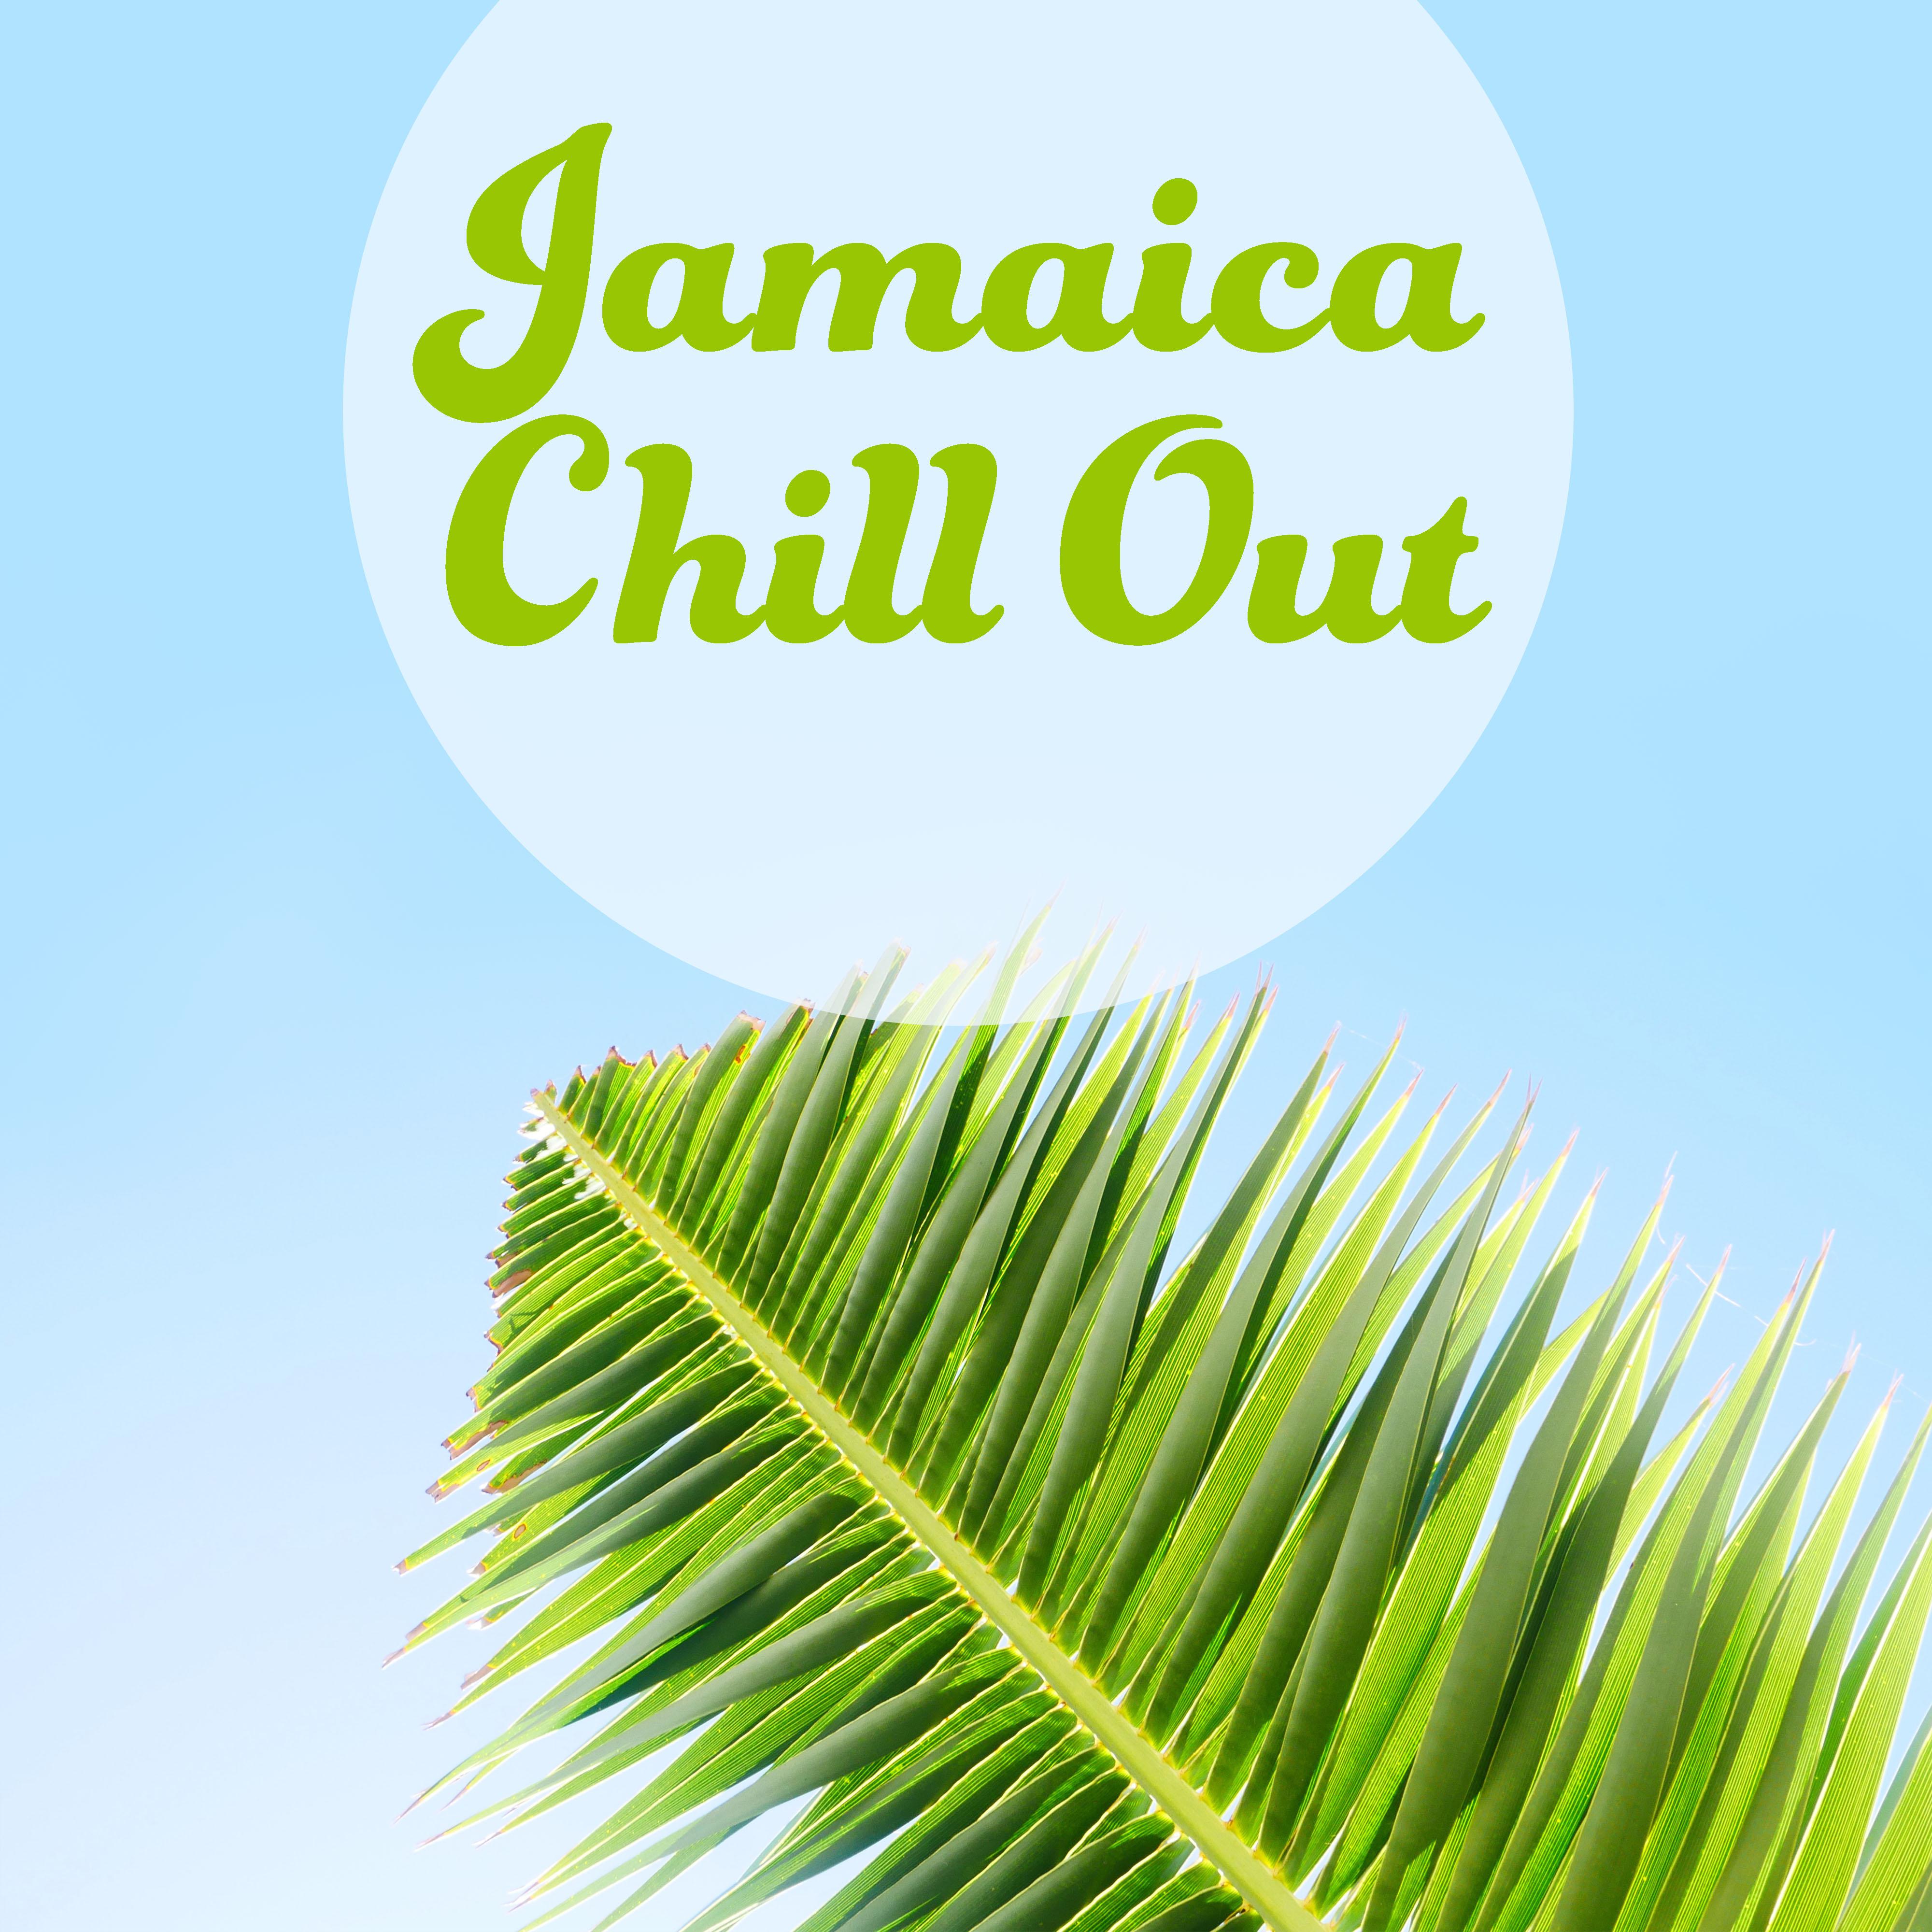 Jamaica Chill Out  Summer Chill Out Music, Rest, Tropical Sounds, Summer Hits 2017, Deep Sun, Relax, Beach Chill